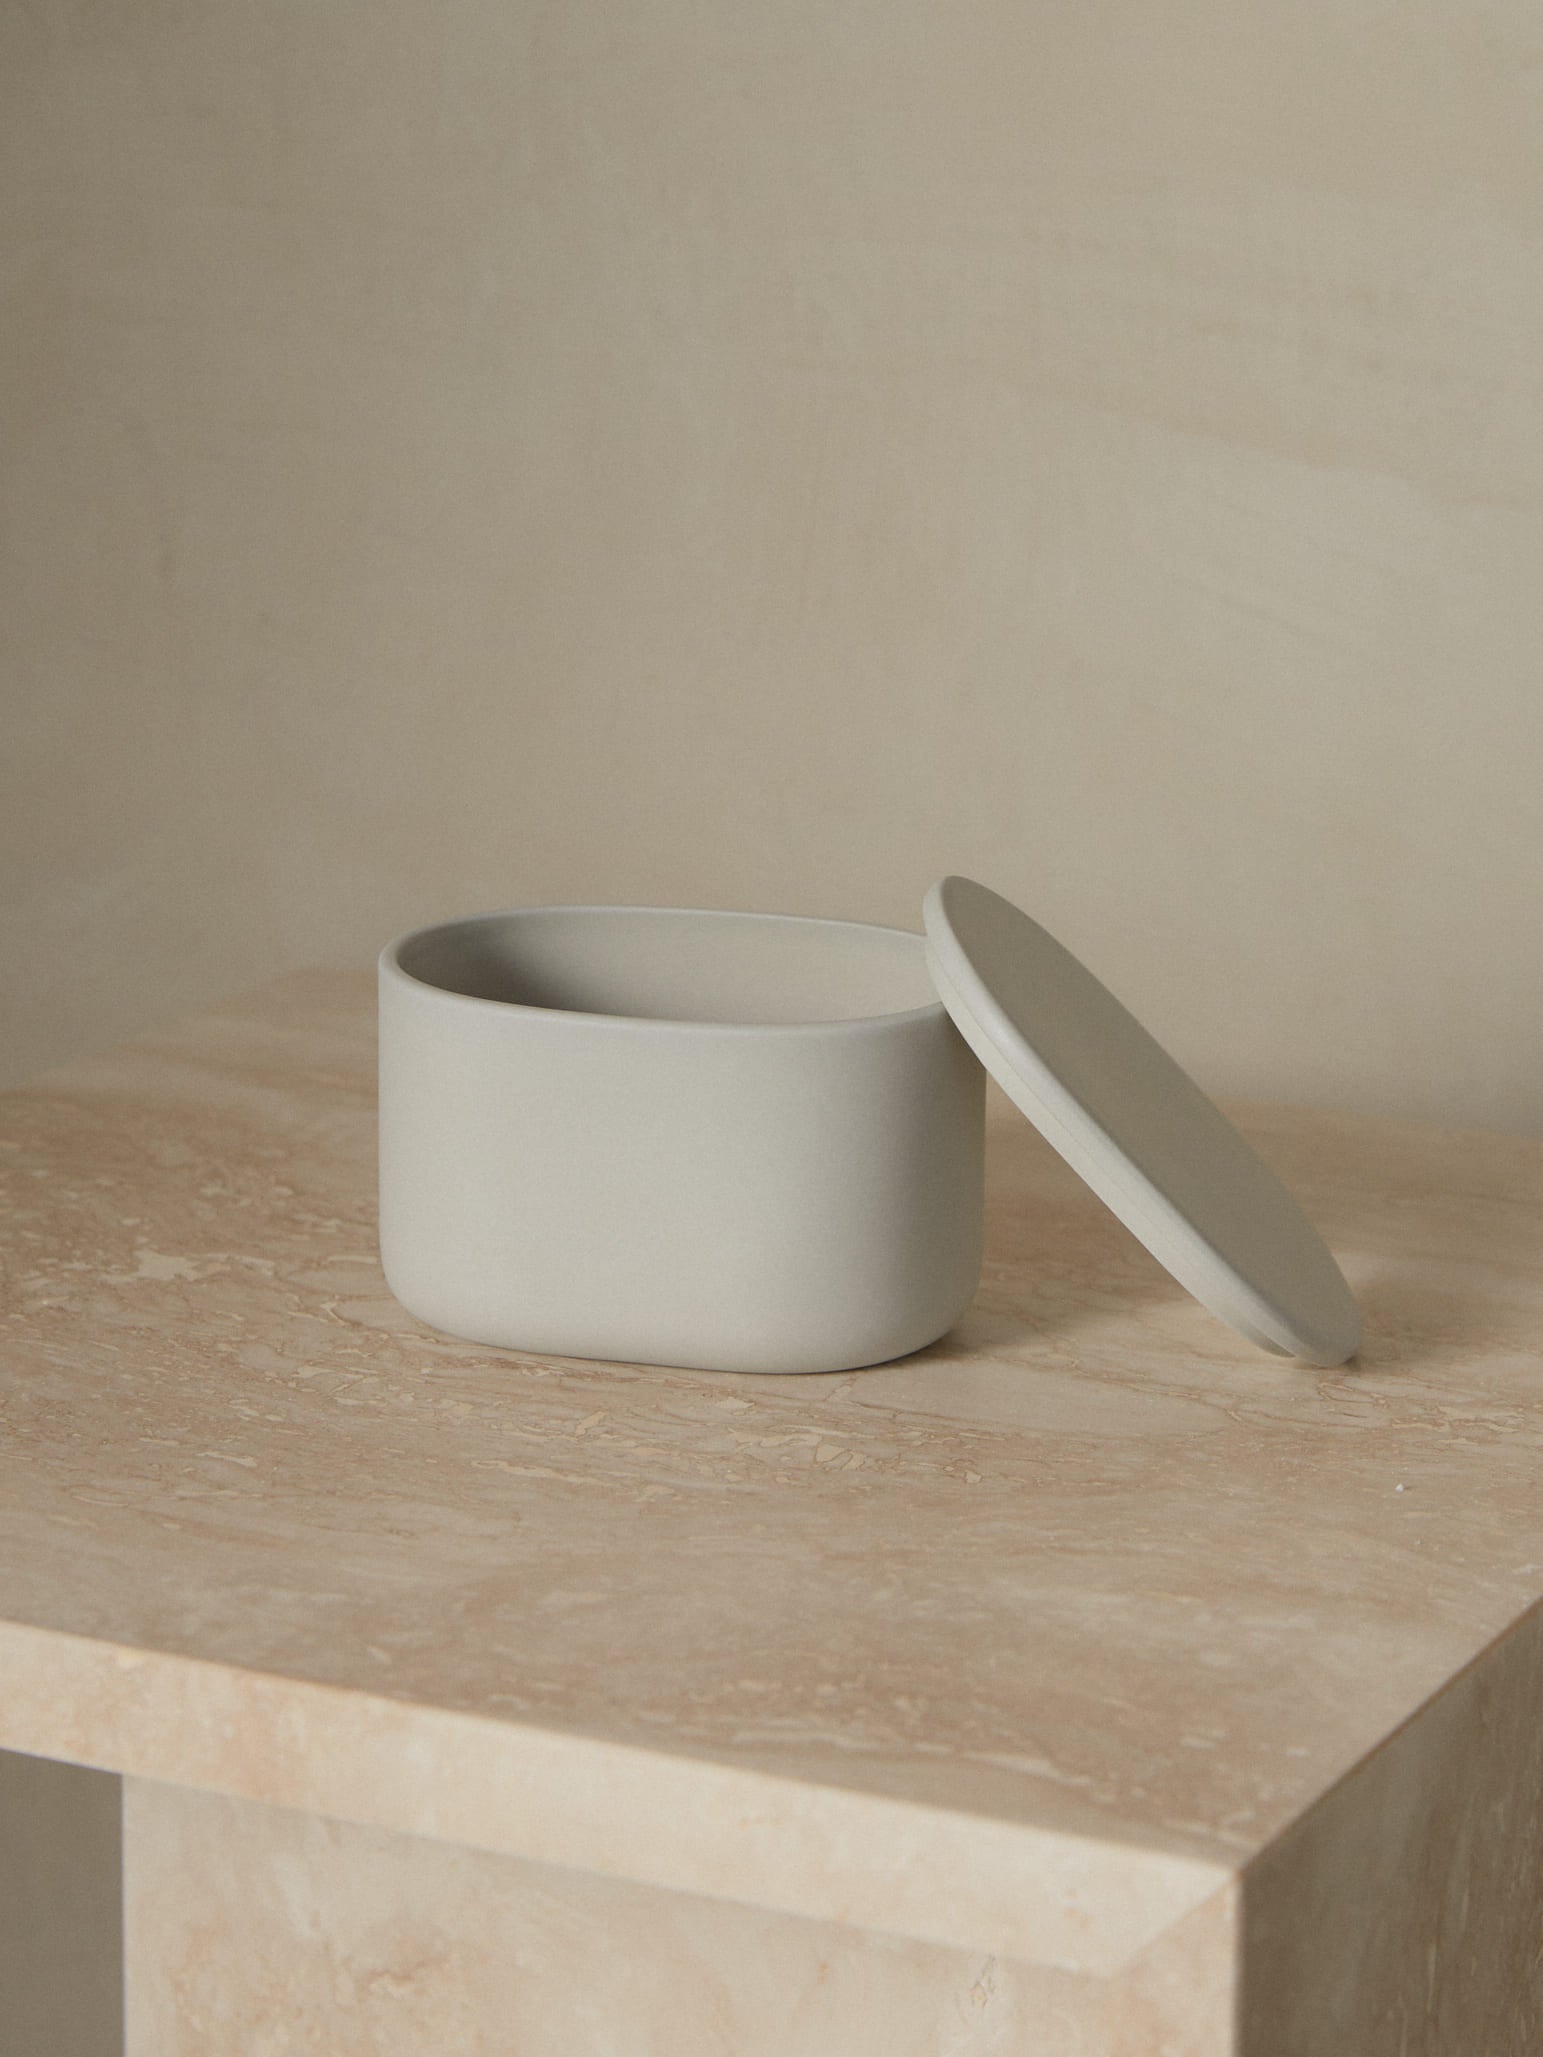 A study in refined simplicity, the Cose Oval Box by Bertrand Lejoly for Serax adds subtle luxury to any bathroom or kitchen. 